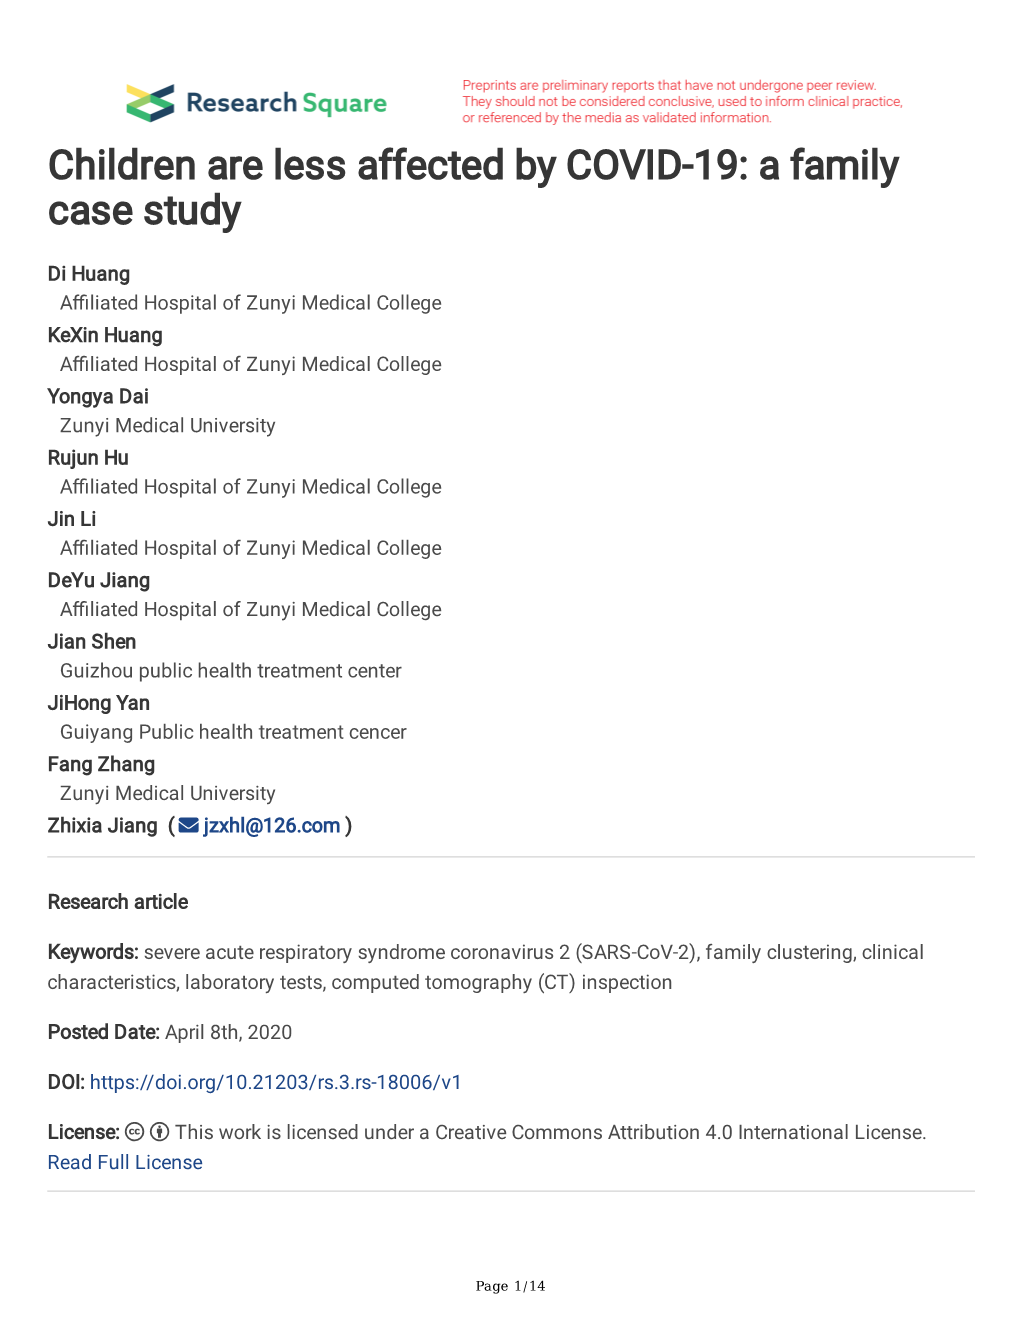 Children Are Less Affected by COVID-19: a Family Case Study